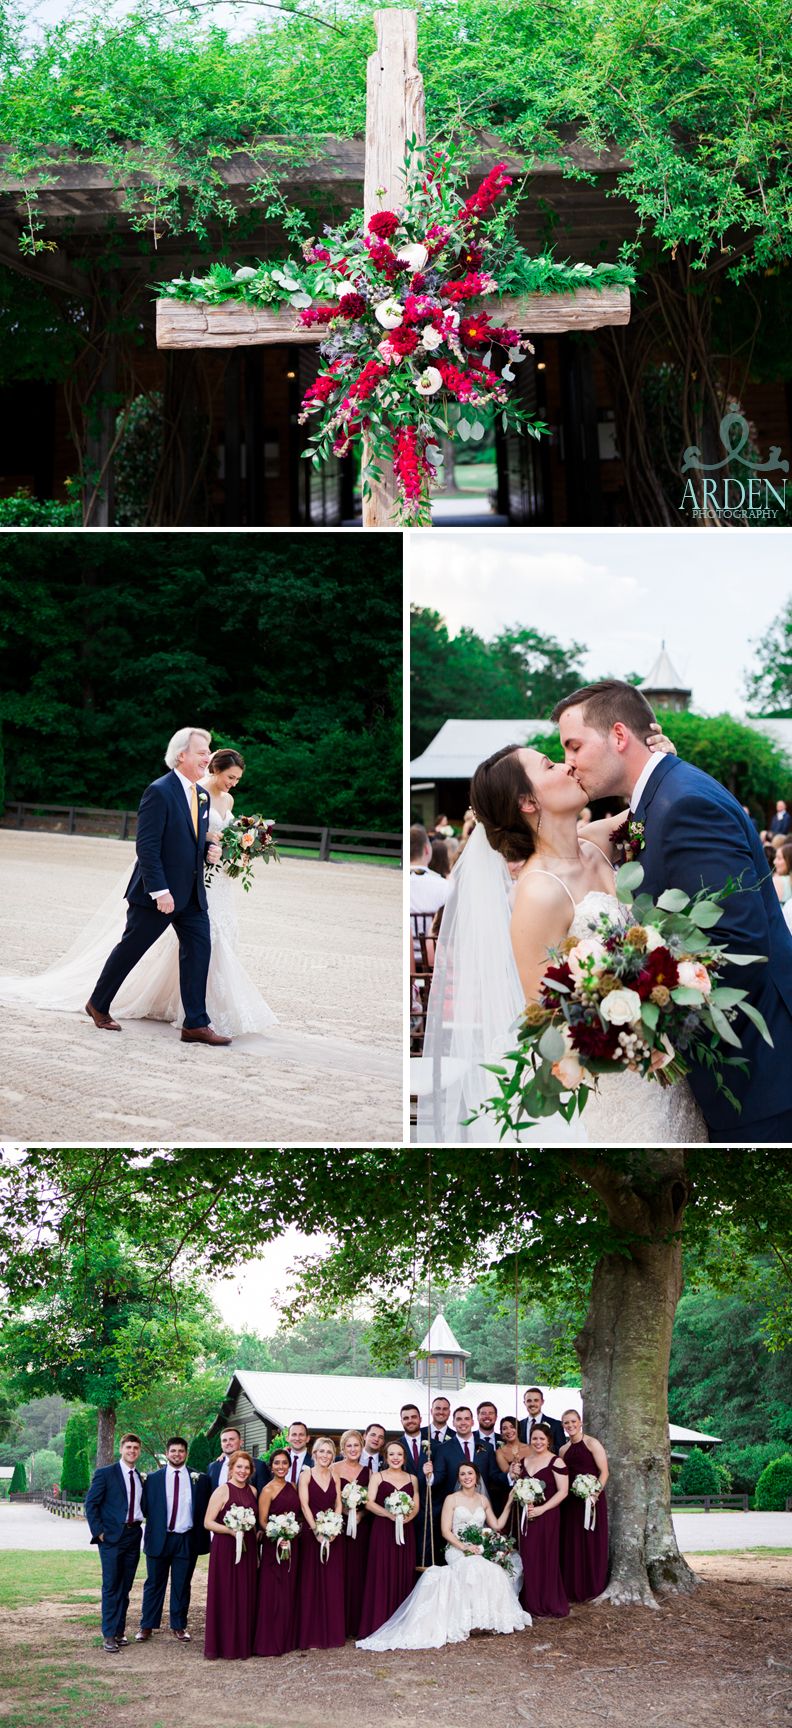  Before, during, and after the ceremony. What’s your favorite ceremony moment? 